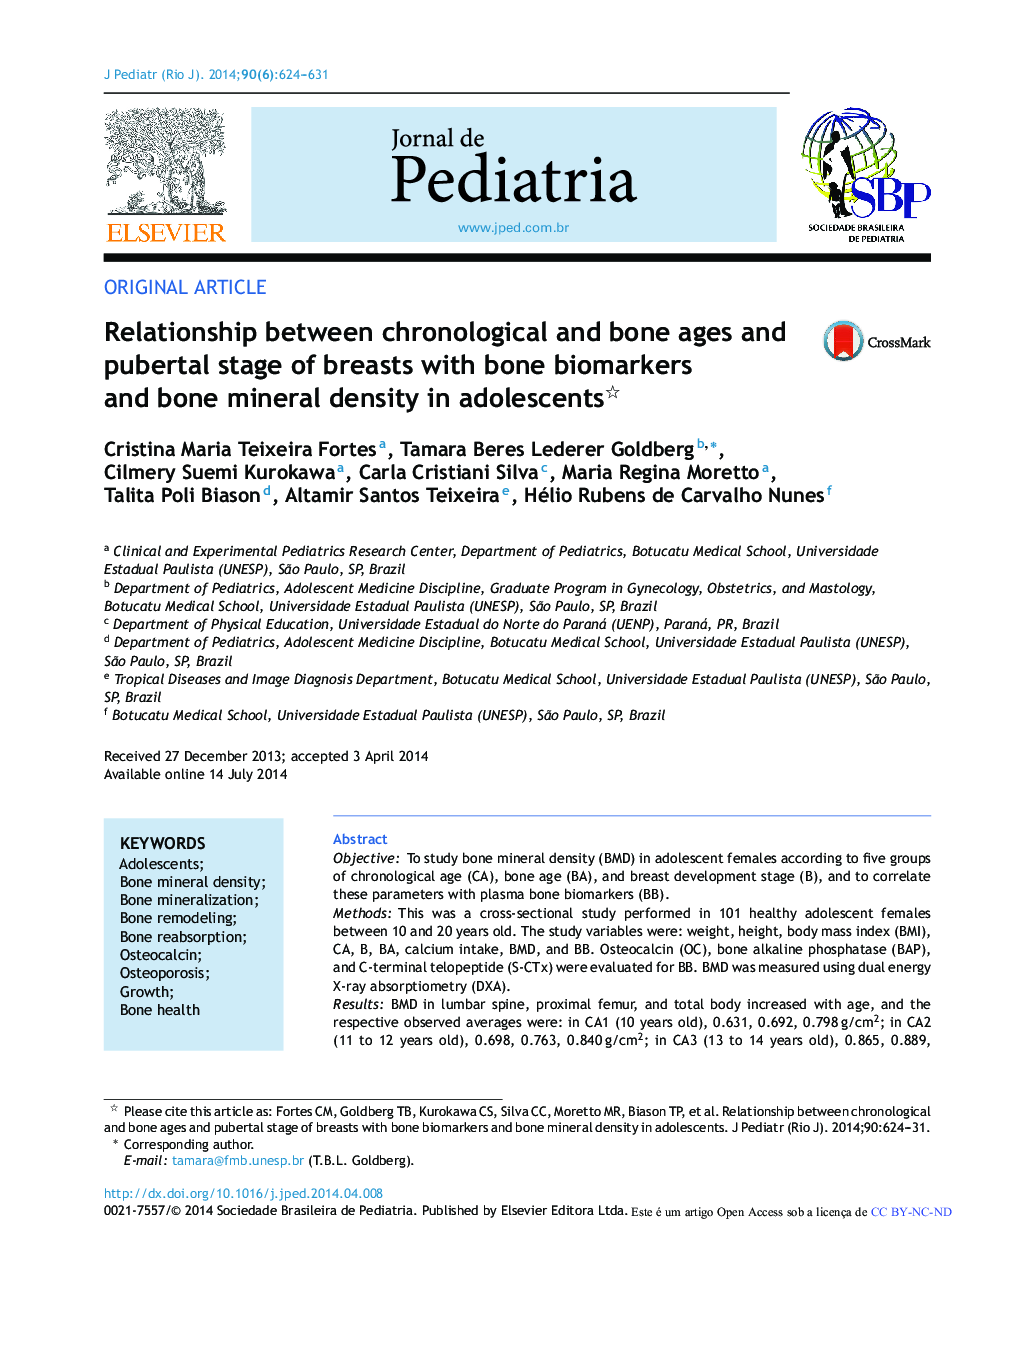 Relationship between chronological and bone ages and pubertal stage of breasts with bone biomarkers and bone mineral density in adolescents 